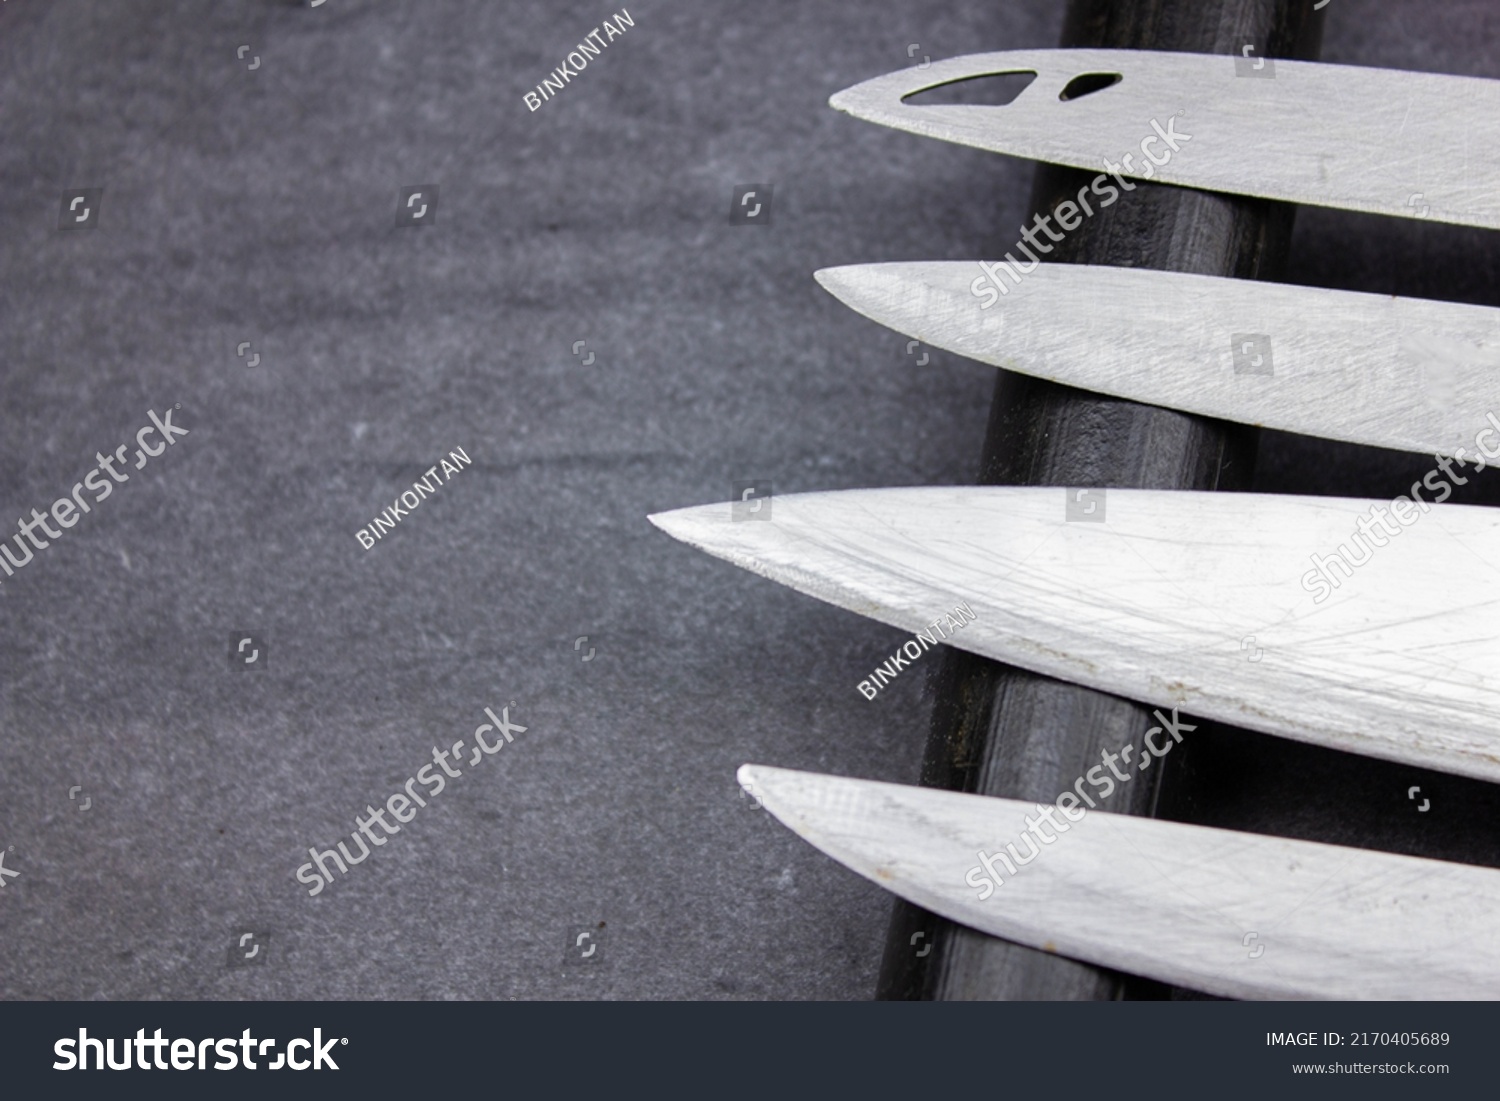 The Blades of knives concept. Sharp steel blades of knives on a dark background. Sharp knives collection. #2170405689